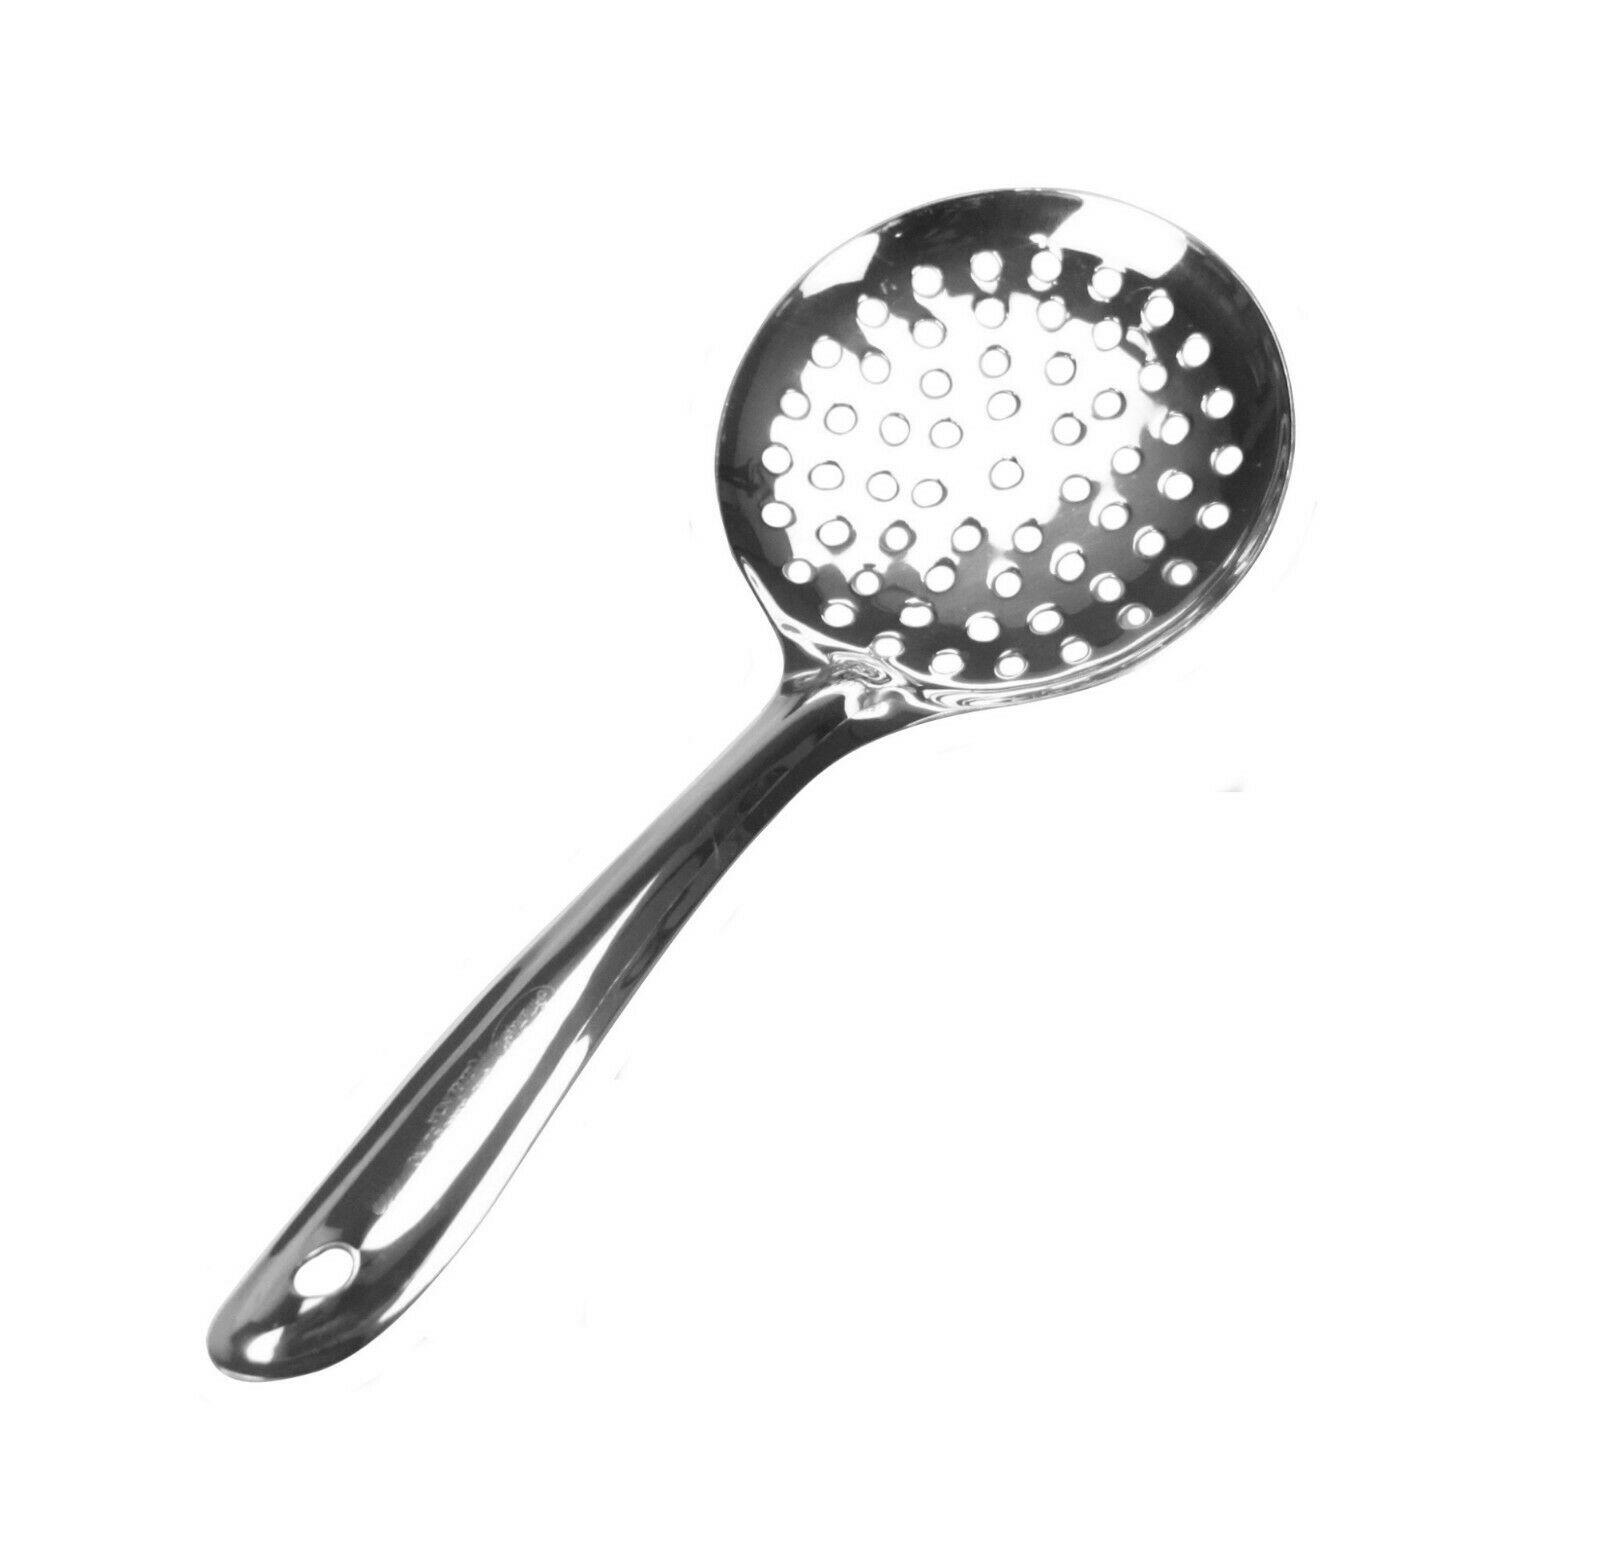 Skimmer Slotted Spoon Stainless Steel Strainer Ladle Perforated Spoon Slotted Deep Fat Fryer Frying Cooking Serving Spoon Oil Skimmer Boondhi Spoon Kitchen Utensil Tool Long Handle 29.5cm x 10.8cm 